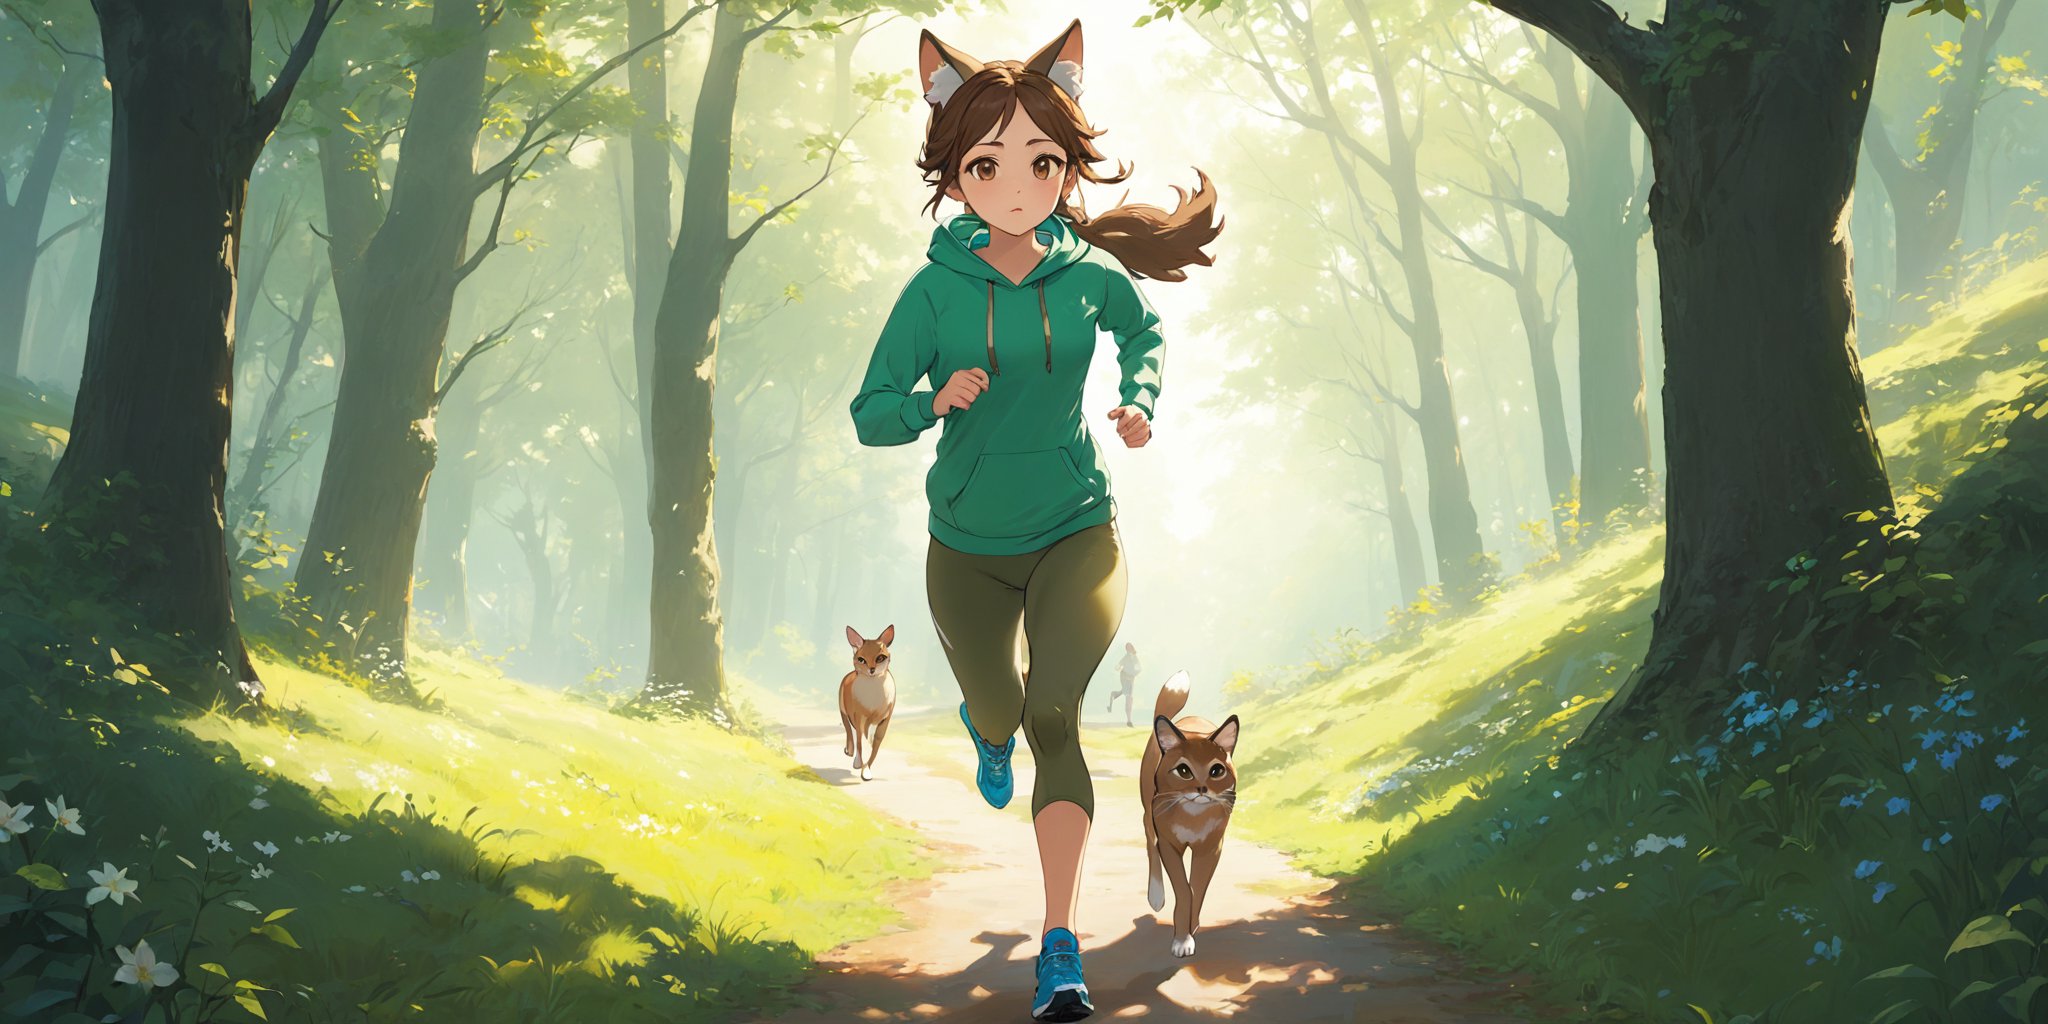 An image of A brown-haired catgirl with her hair tied back in a ponytail in a green hoodie runs down an idyllic forest path. She is wearing a pair of blue running shoes and dark green yoga pants. An animal vaguely resembling a fox is running alongside her.